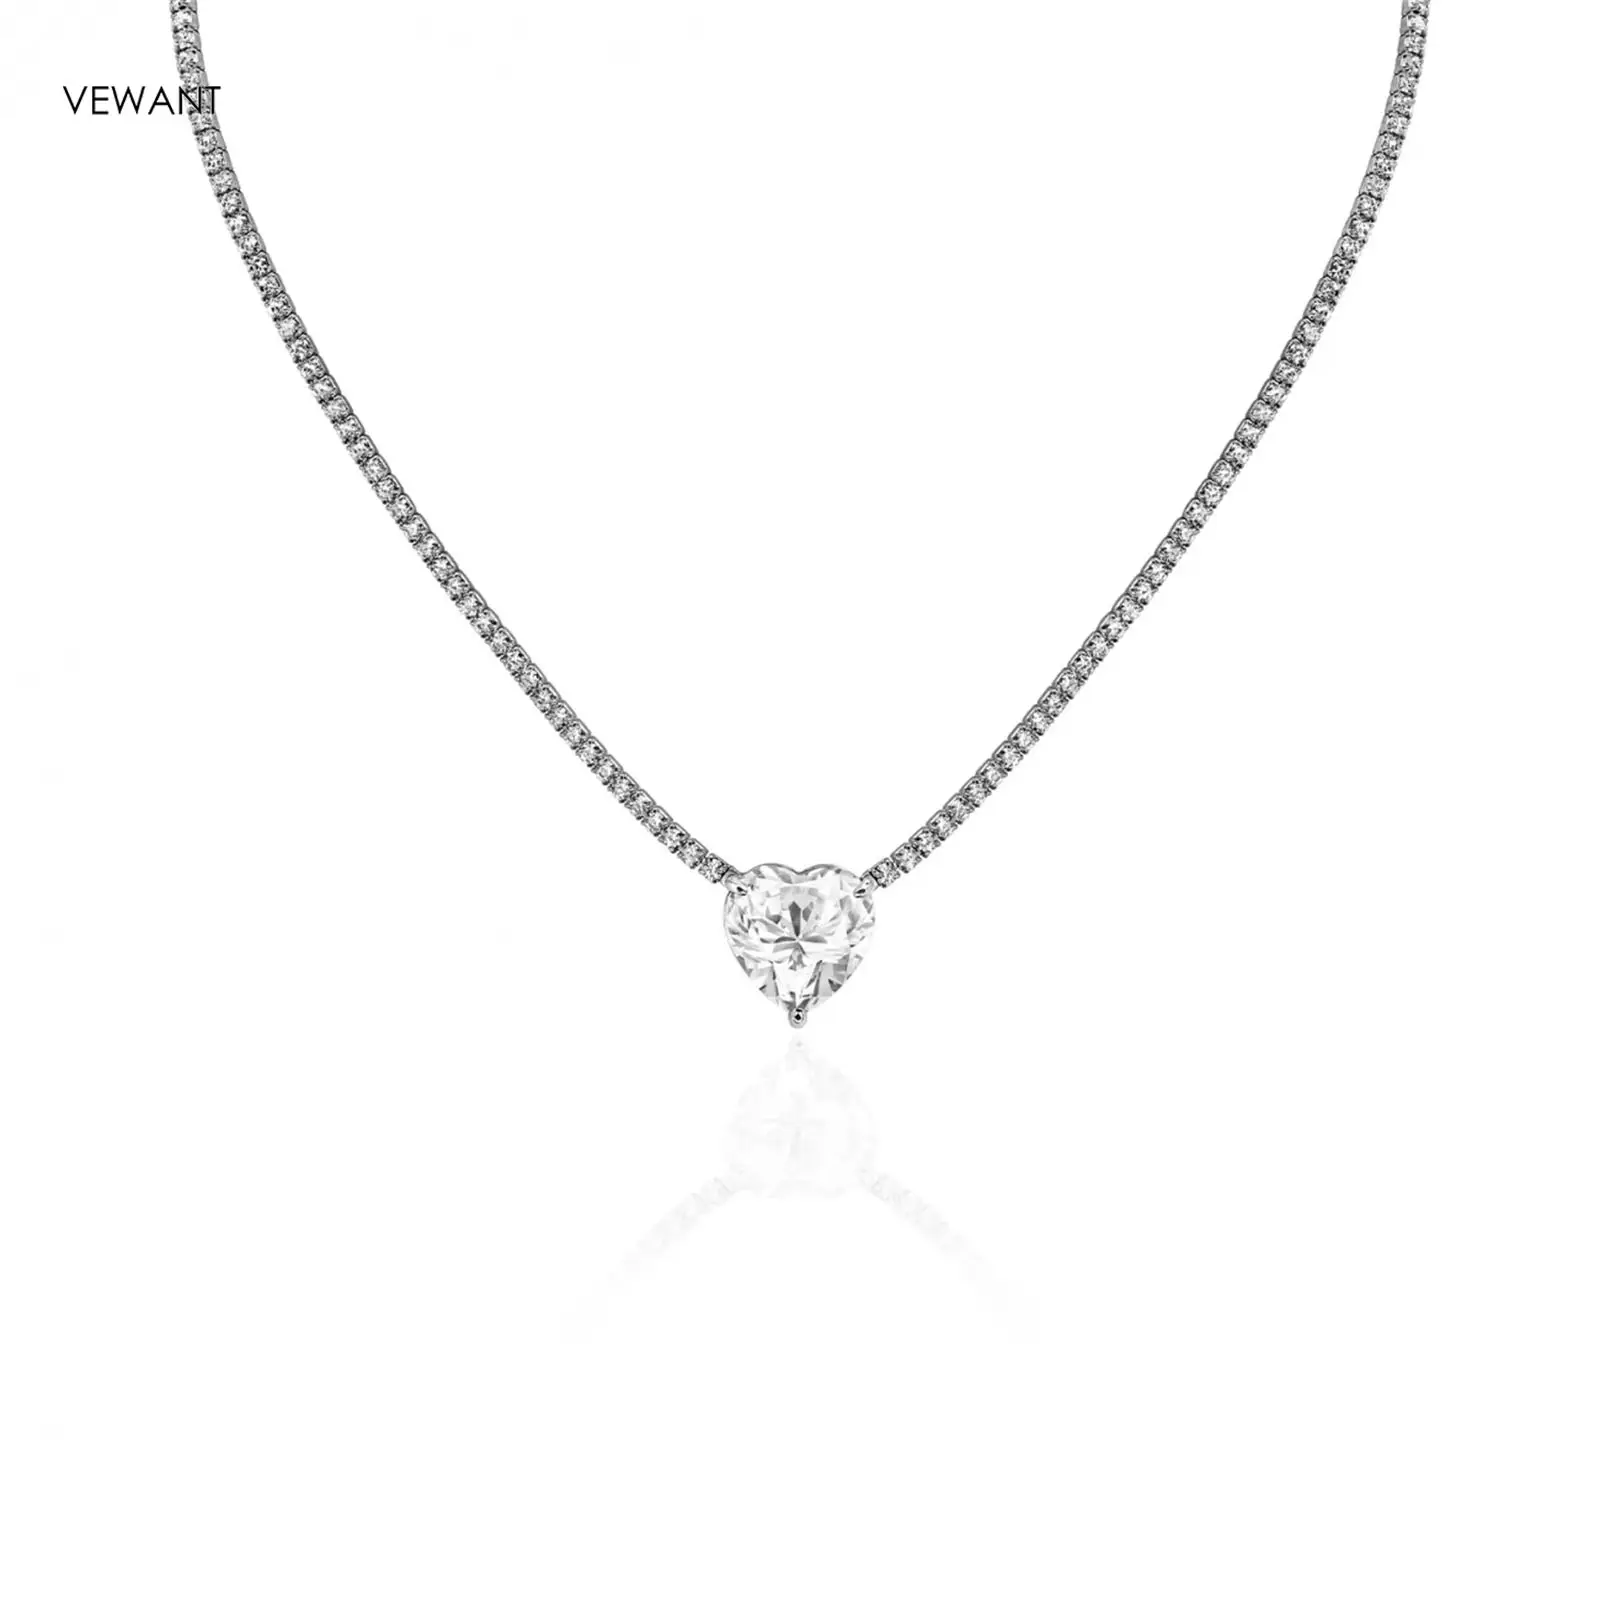 Vewant Fashion 925 Sterling Silver Tennis Necklace White Pink Blue Solitaire Gemstone 10mm Heart Necklace